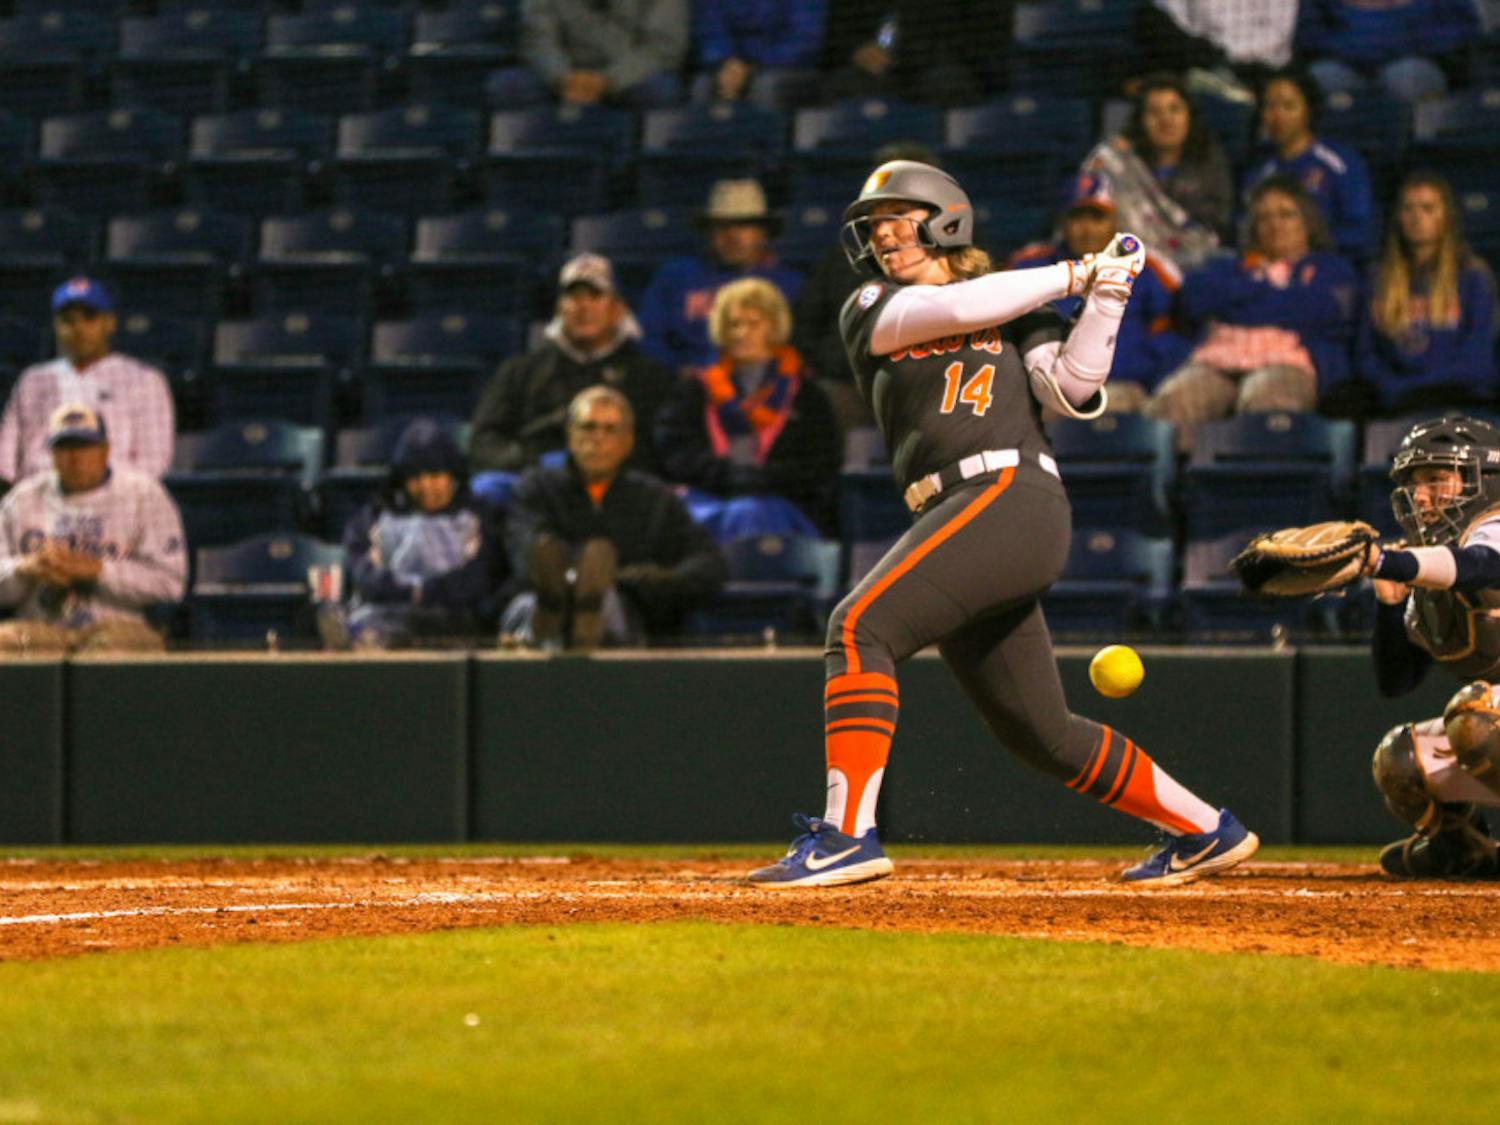 Gators catcher Jordan Roberts went 0 for 4 during Florida's 3-1 loss to Ole Miss on Sunday.
&nbsp;